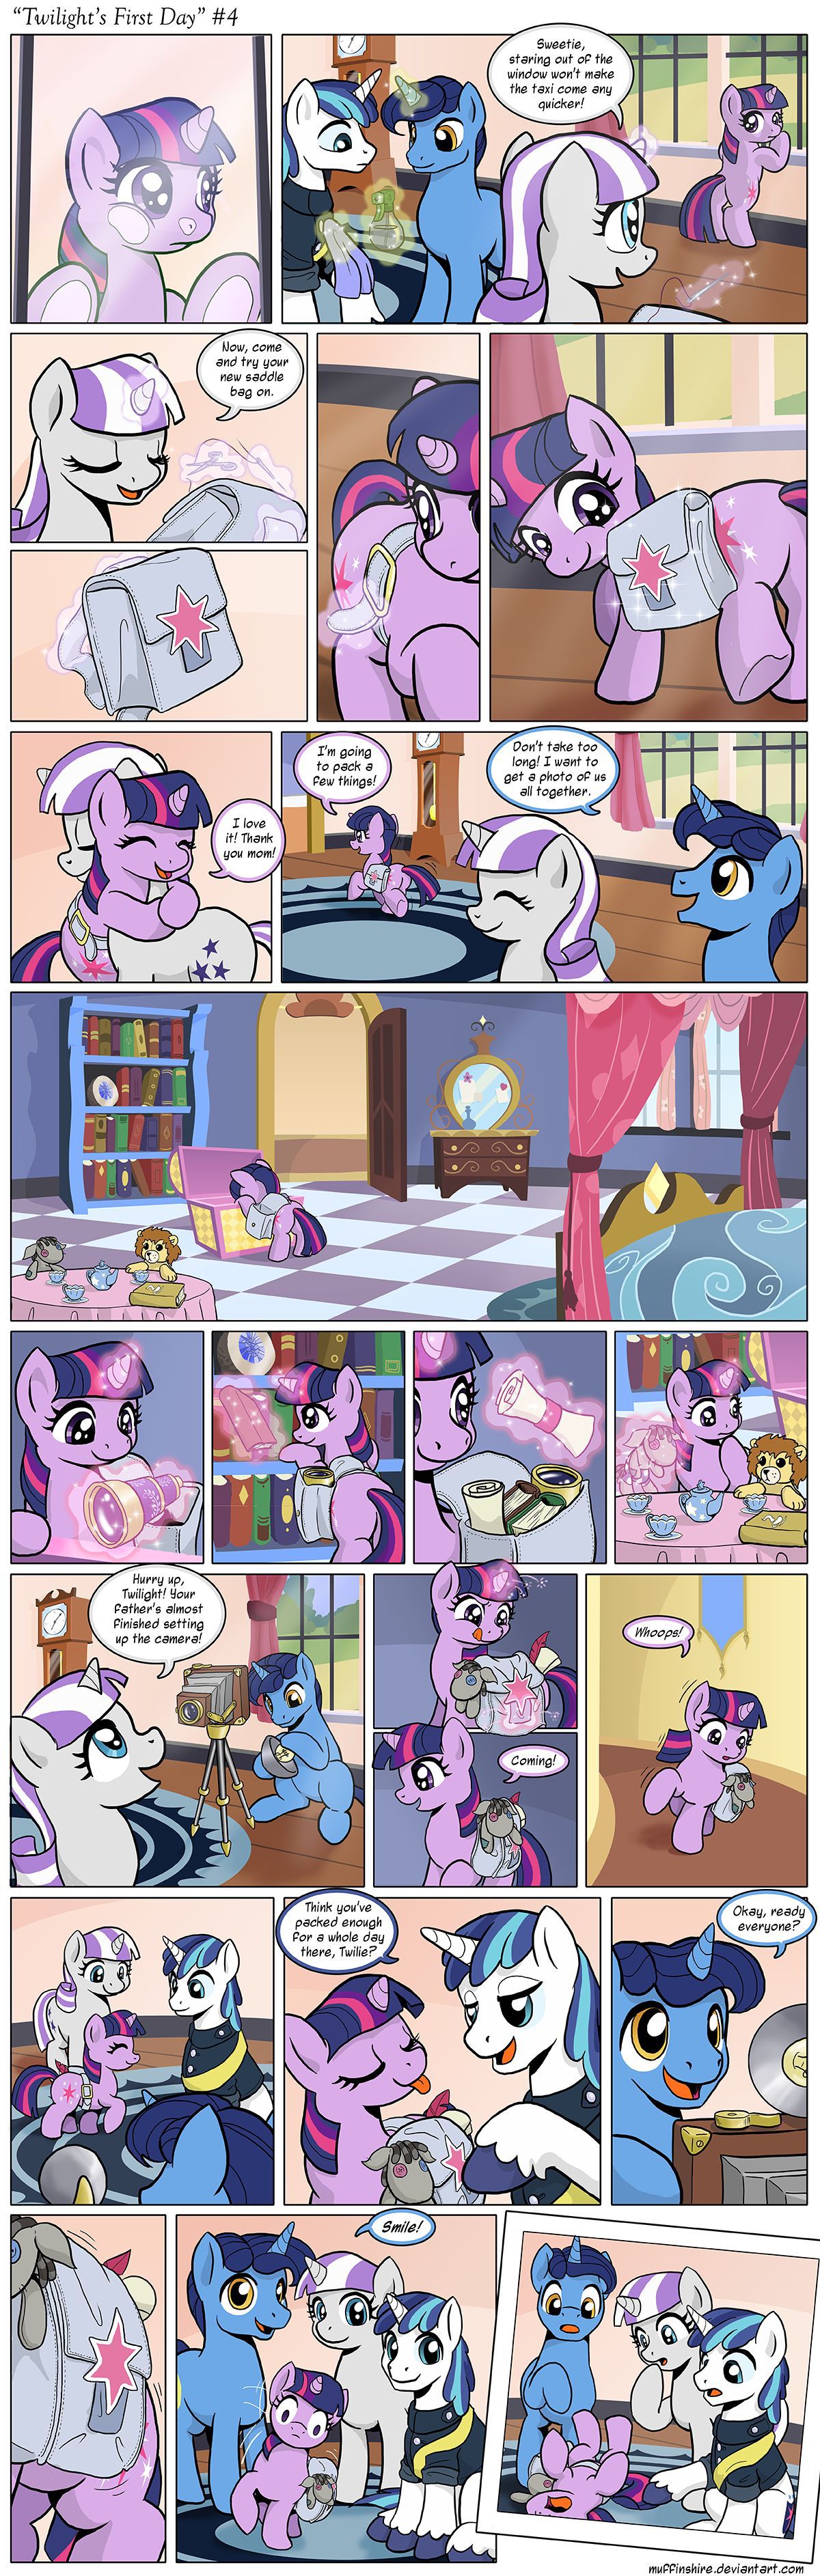 [Muffinshire] Twilight's First Day (My Little Pony: Friendship is Magic) [English] 4